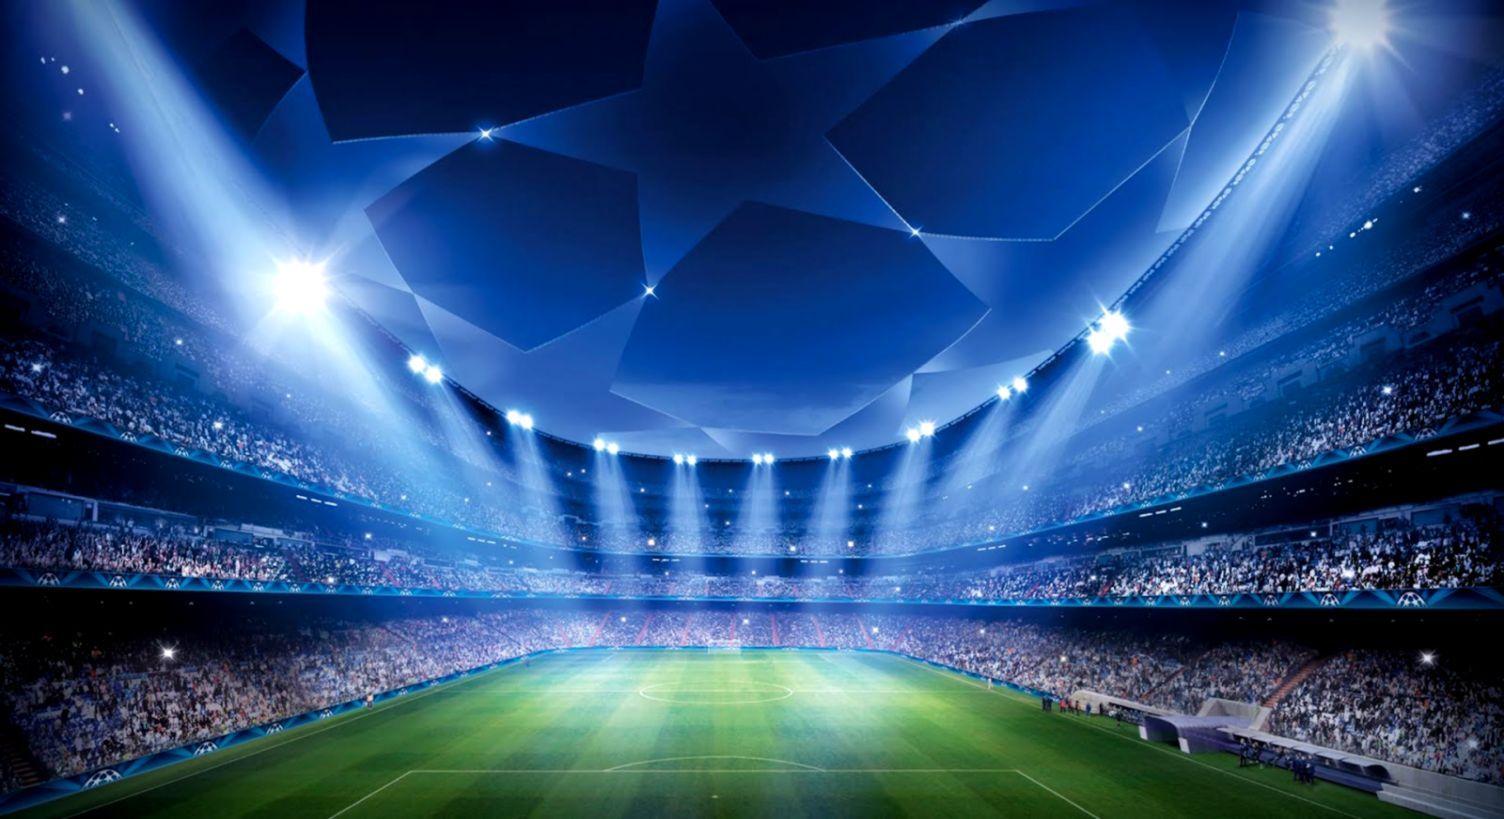 Champions League Stadium Background. Image Wallpaper Collections